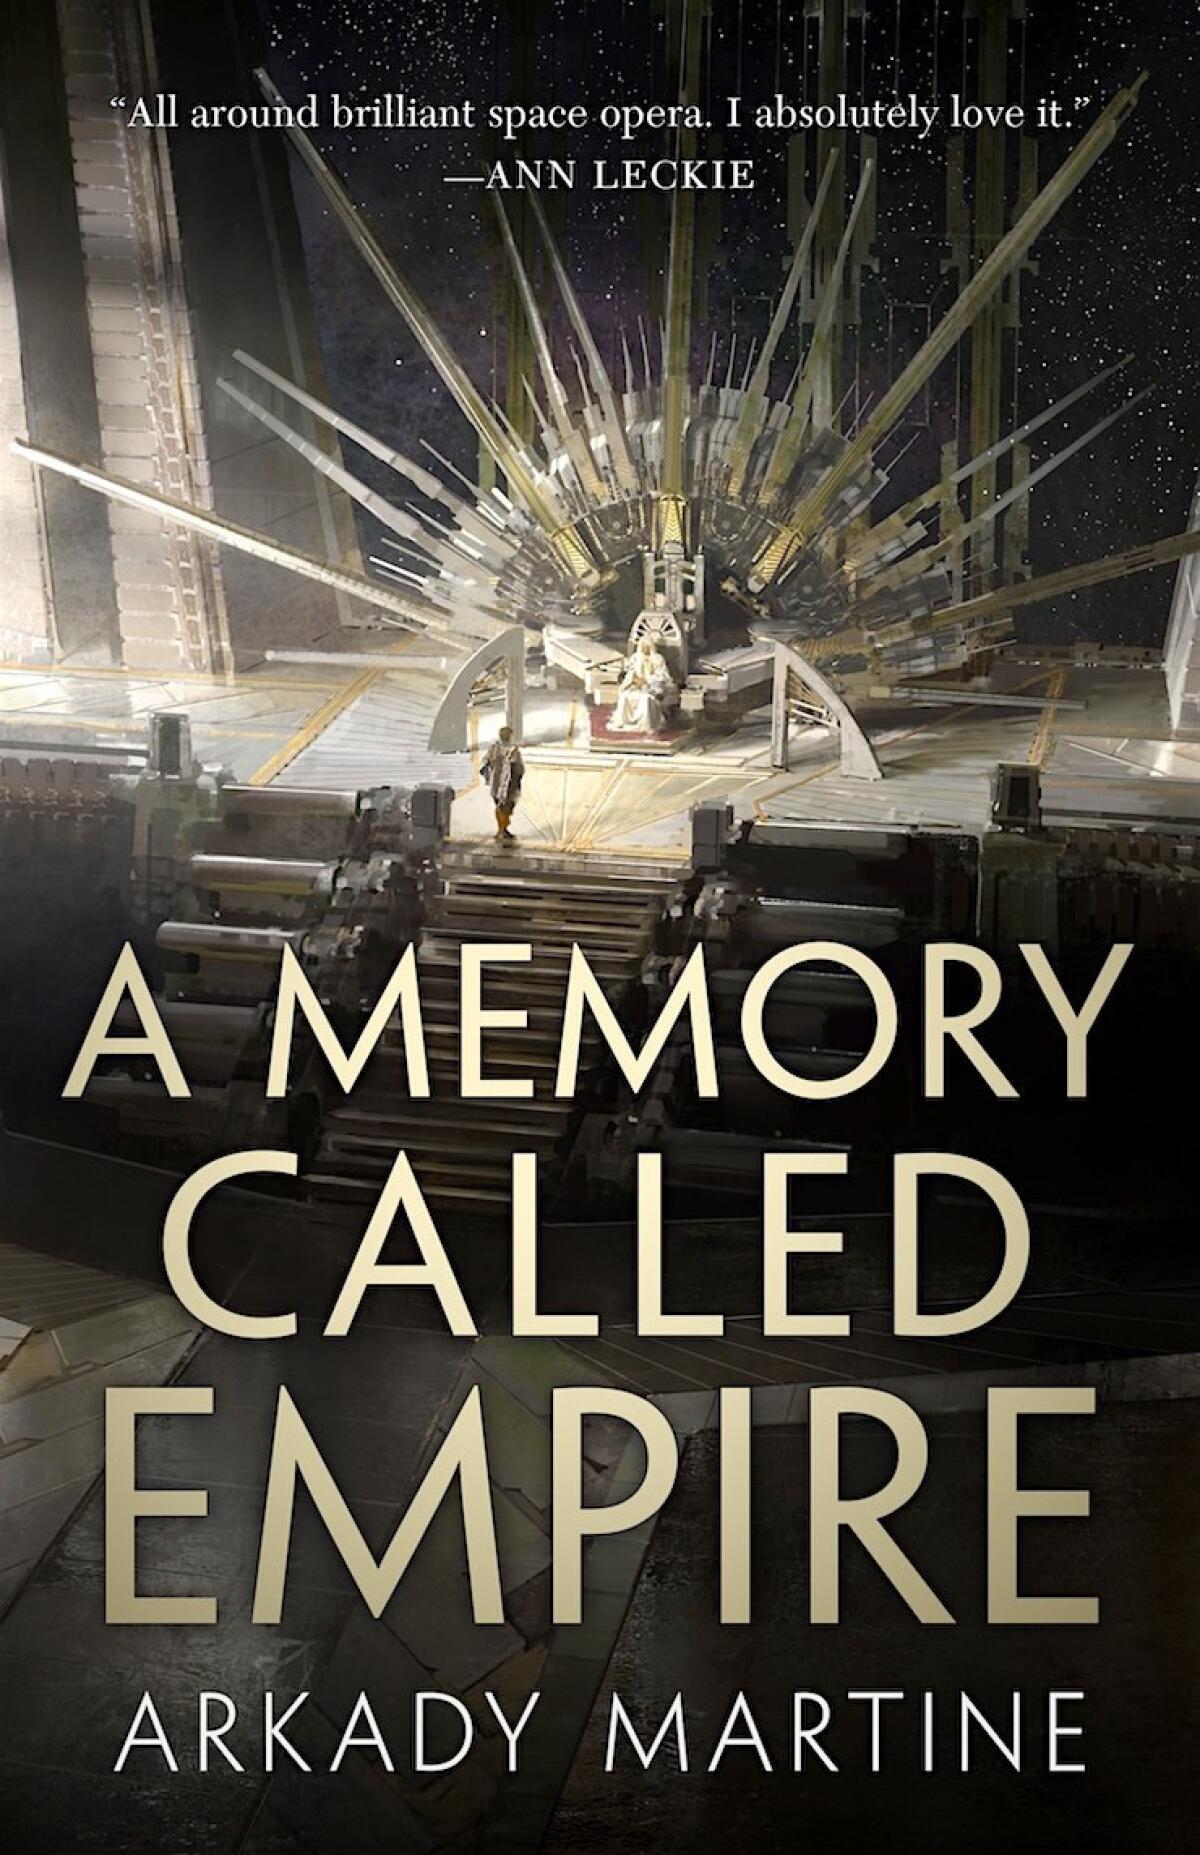 A book jacket for Arkady Martine's "A Memory Called Empire."